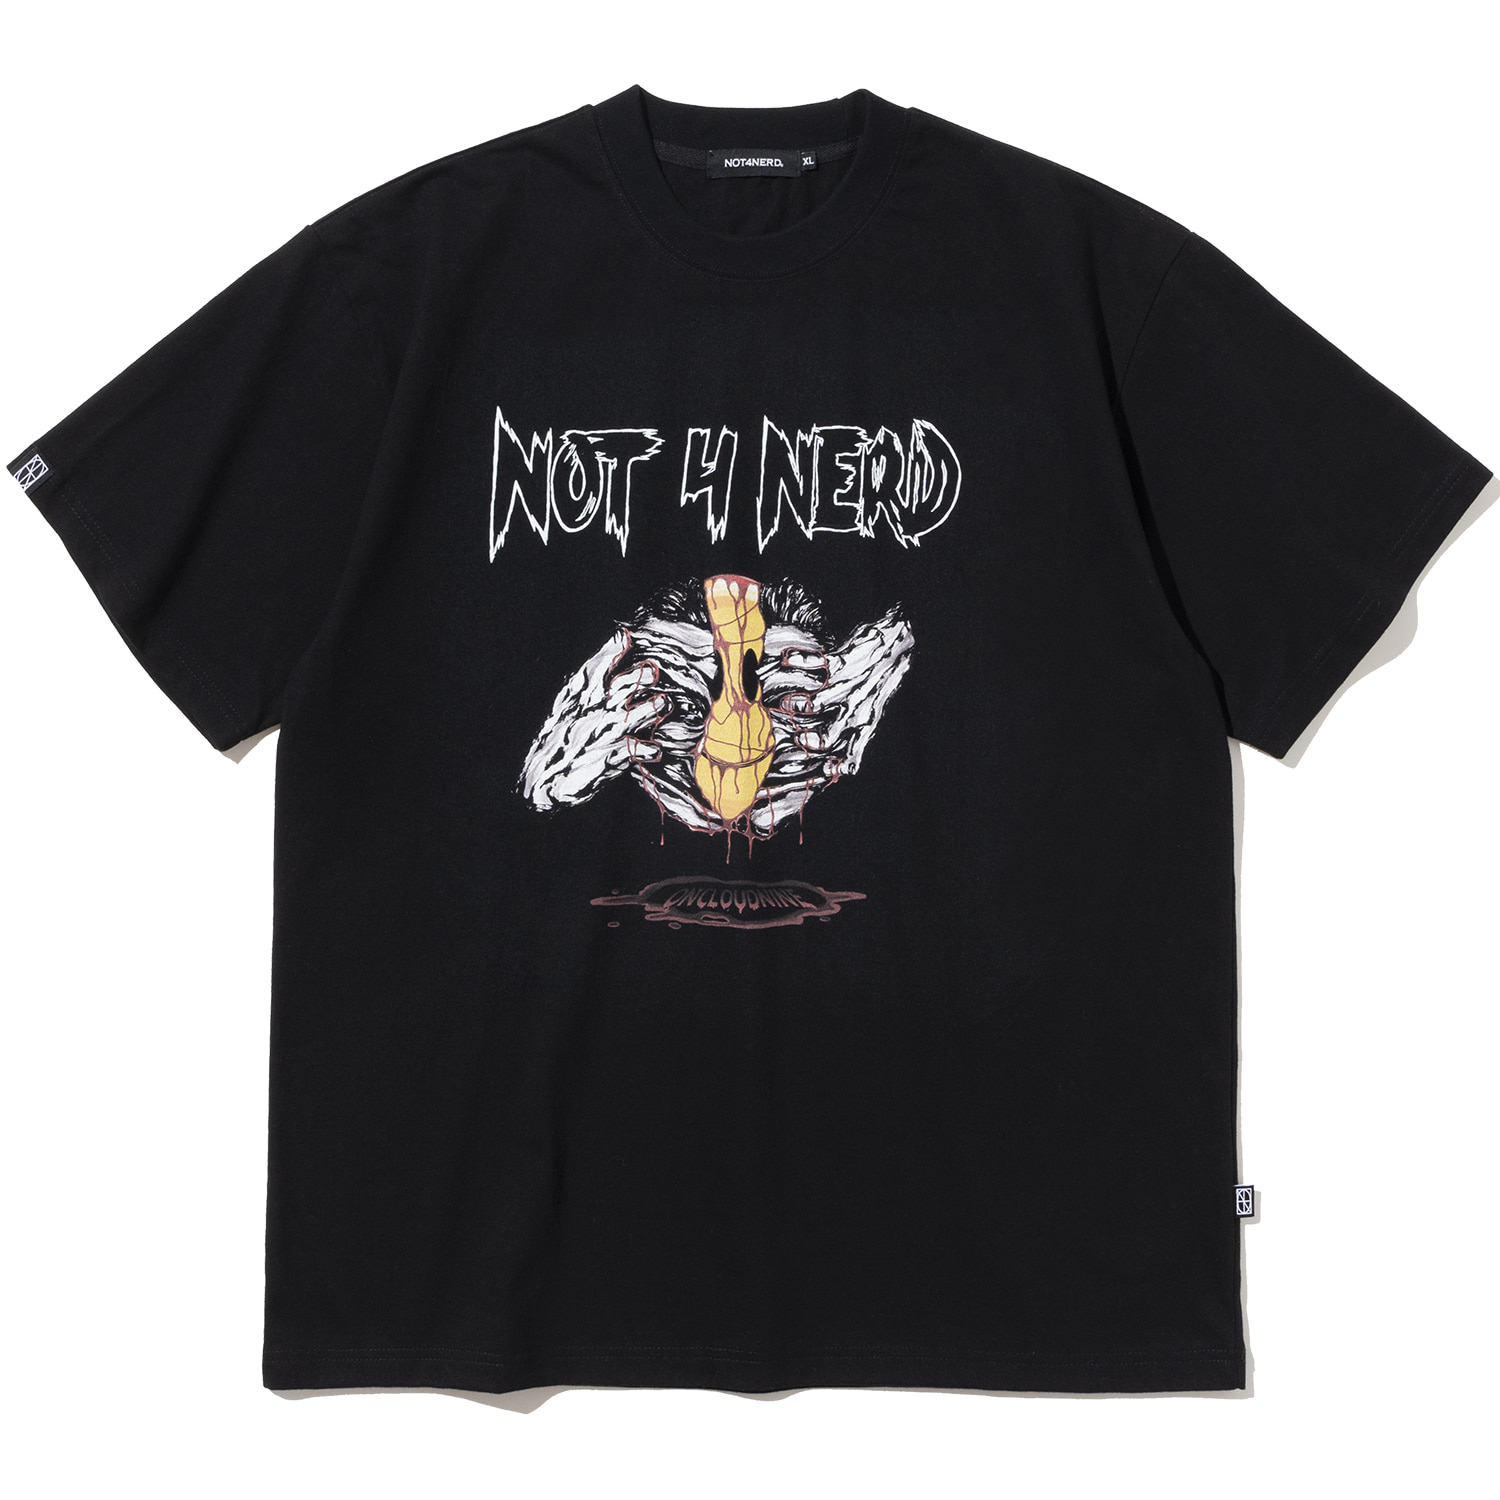 Twisted Smile T-Shirts - Black,NOT4NERD